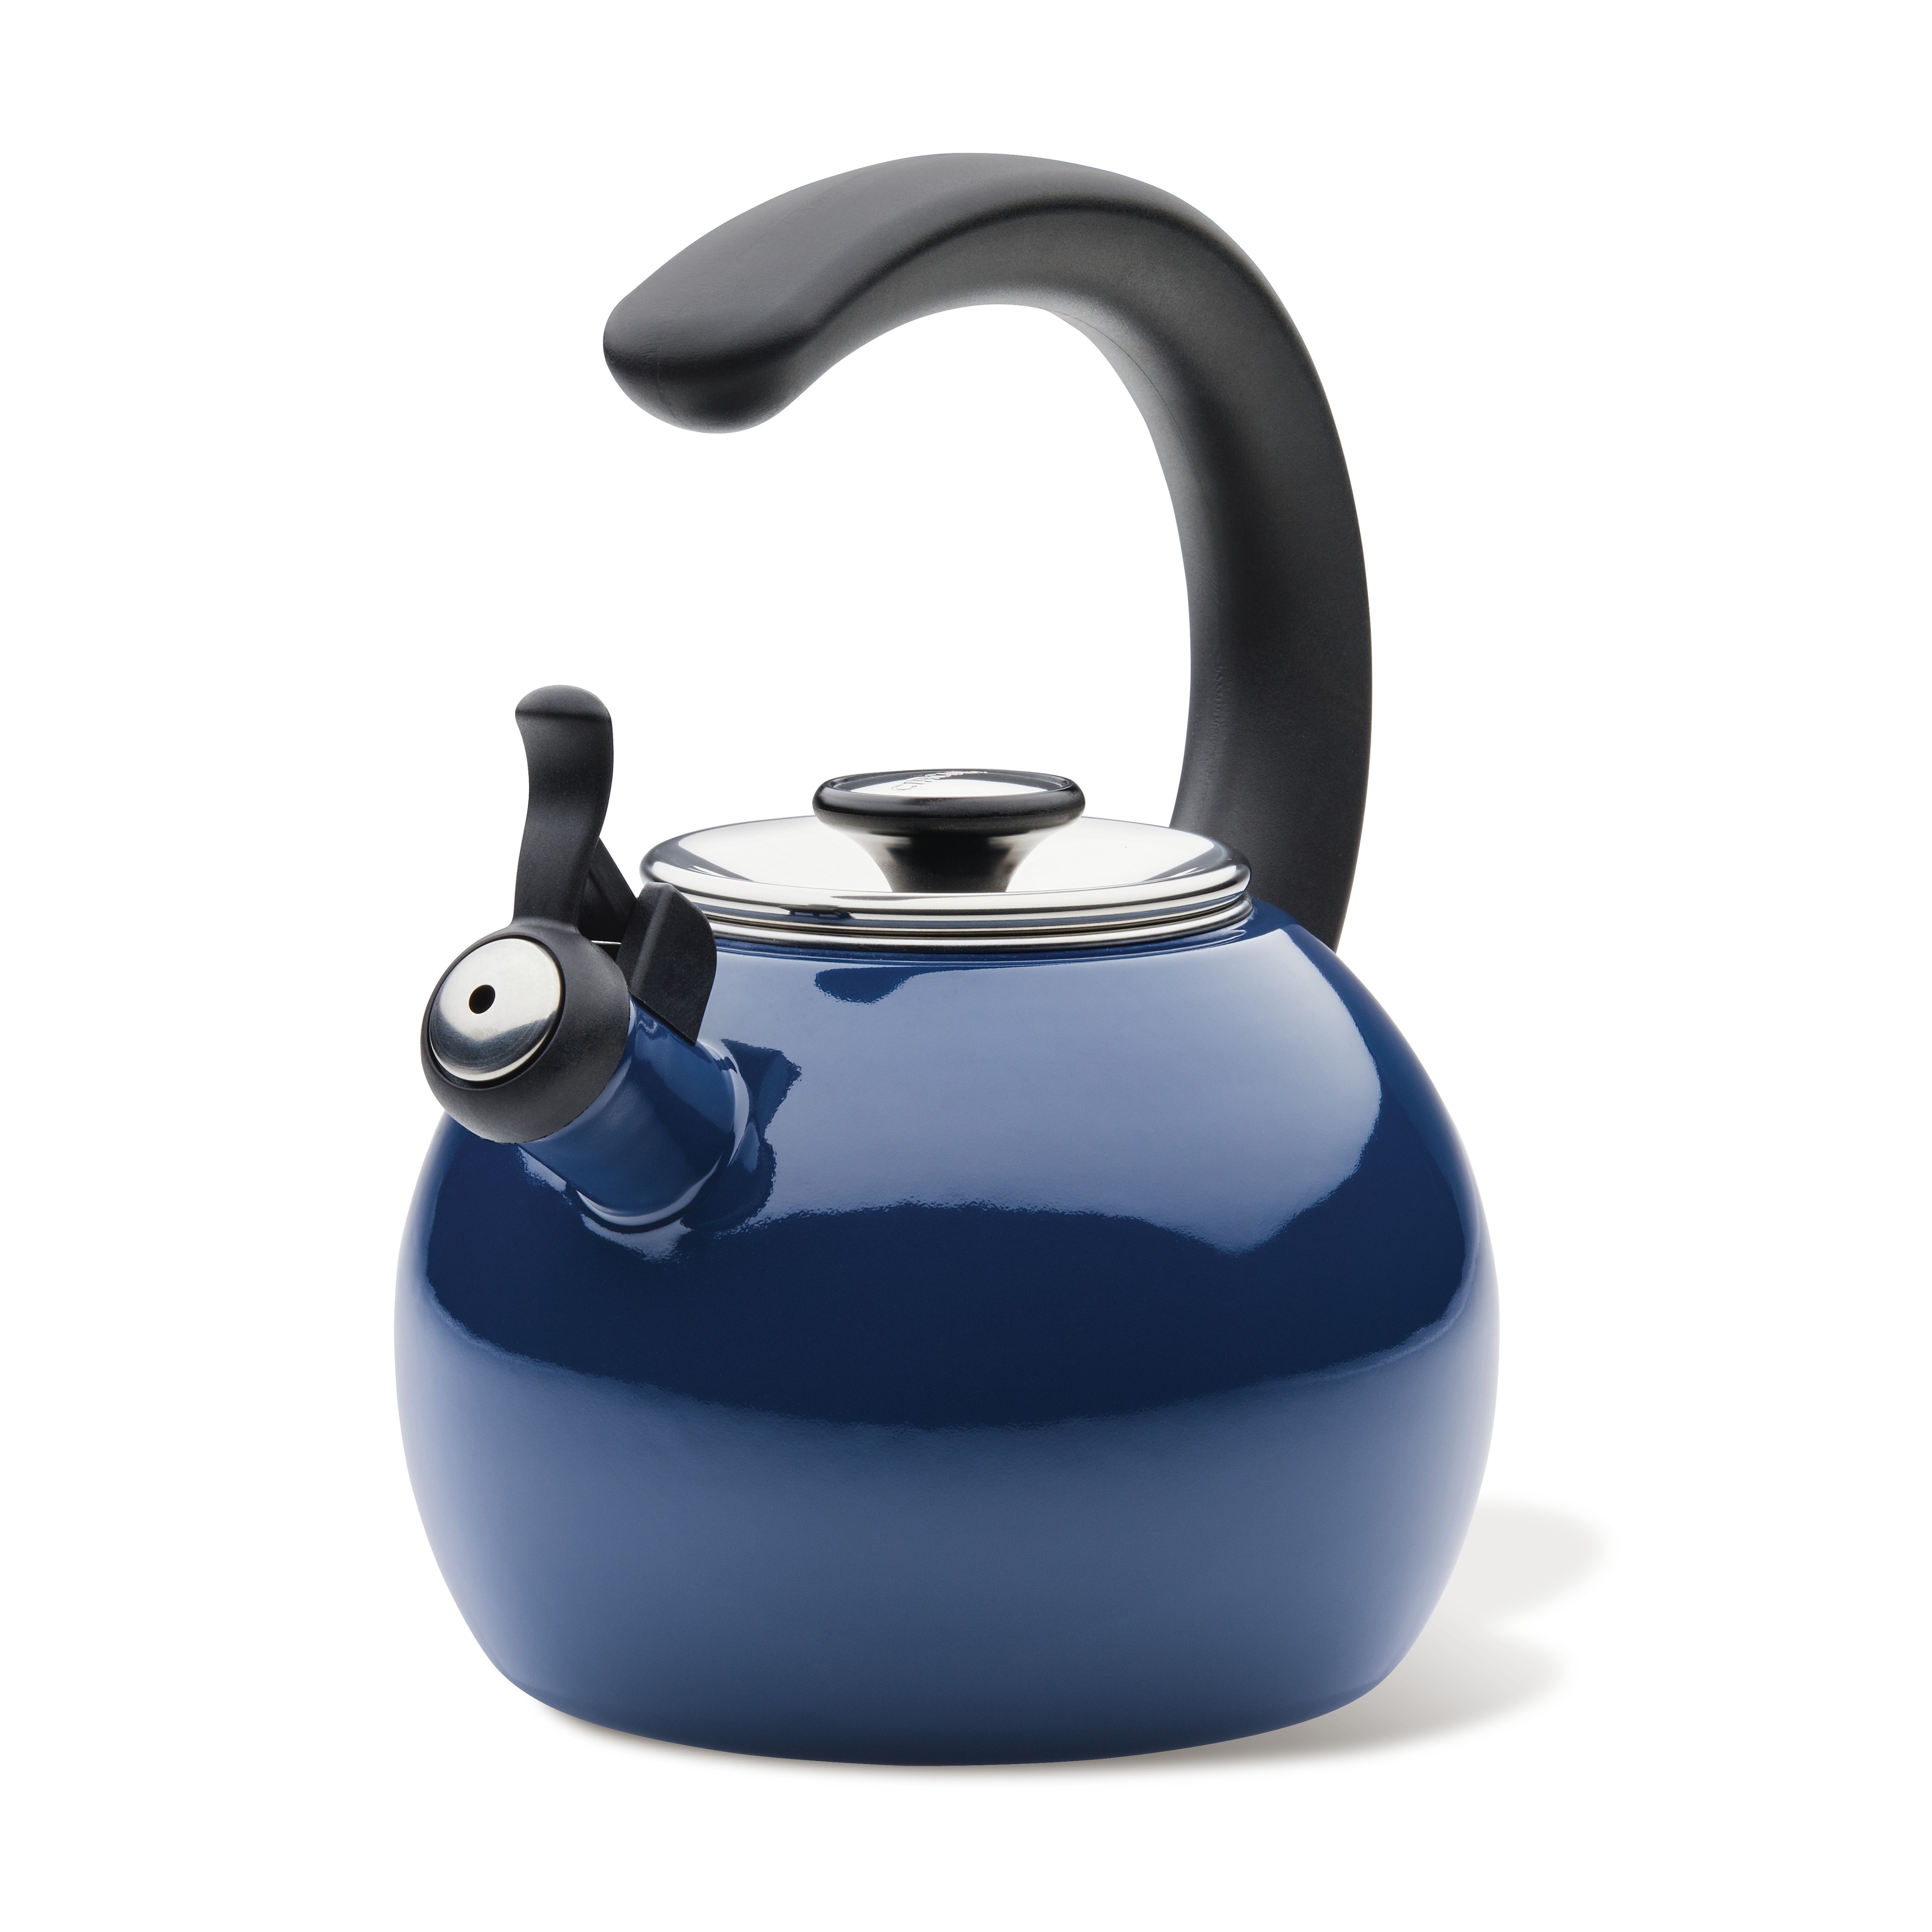 https://ak1.ostkcdn.com/images/products/is/images/direct/b5919e286fe456cbe06044b0fe9f7f87b0a1f8c9/Circulon-Enamel-on-Steel-Whistling-Induction-Teakettle-With-Flip-Up-Spout%2C-2-Quart%2C-Navy.jpg